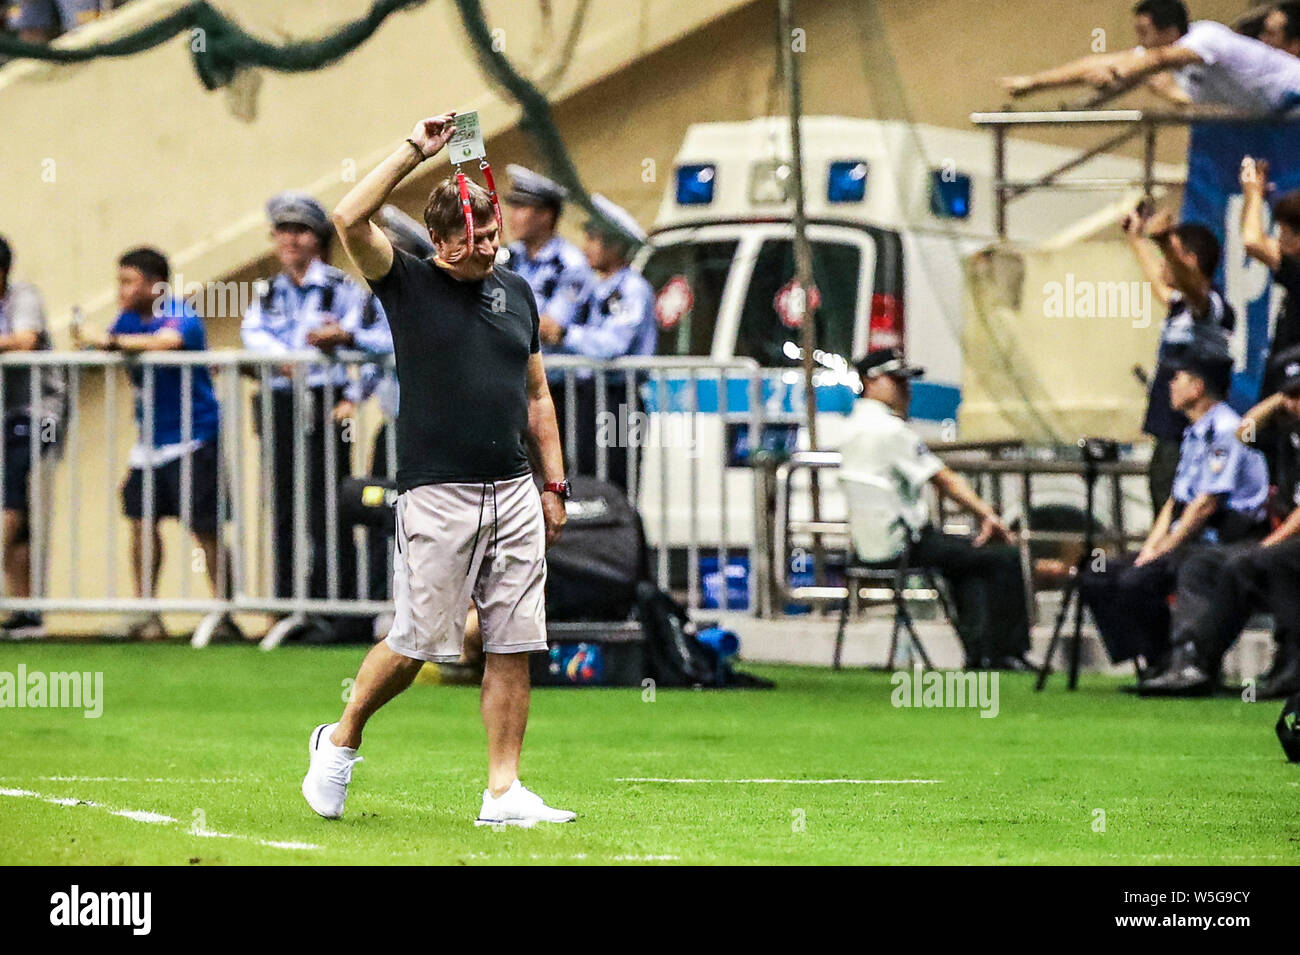 Head coach Dragan Stojkovic of Guangzhou R&F reacts as he watches his players competing against Shanghai Greenland Shenhua in their 20th round match during the 2019 Chinese Football Association Super League (CSL) in Shanghai, China, 27 July 2019. Shanghai Greenland Shenhua defeated Guangzhou R&F 5-3. Stock Photo